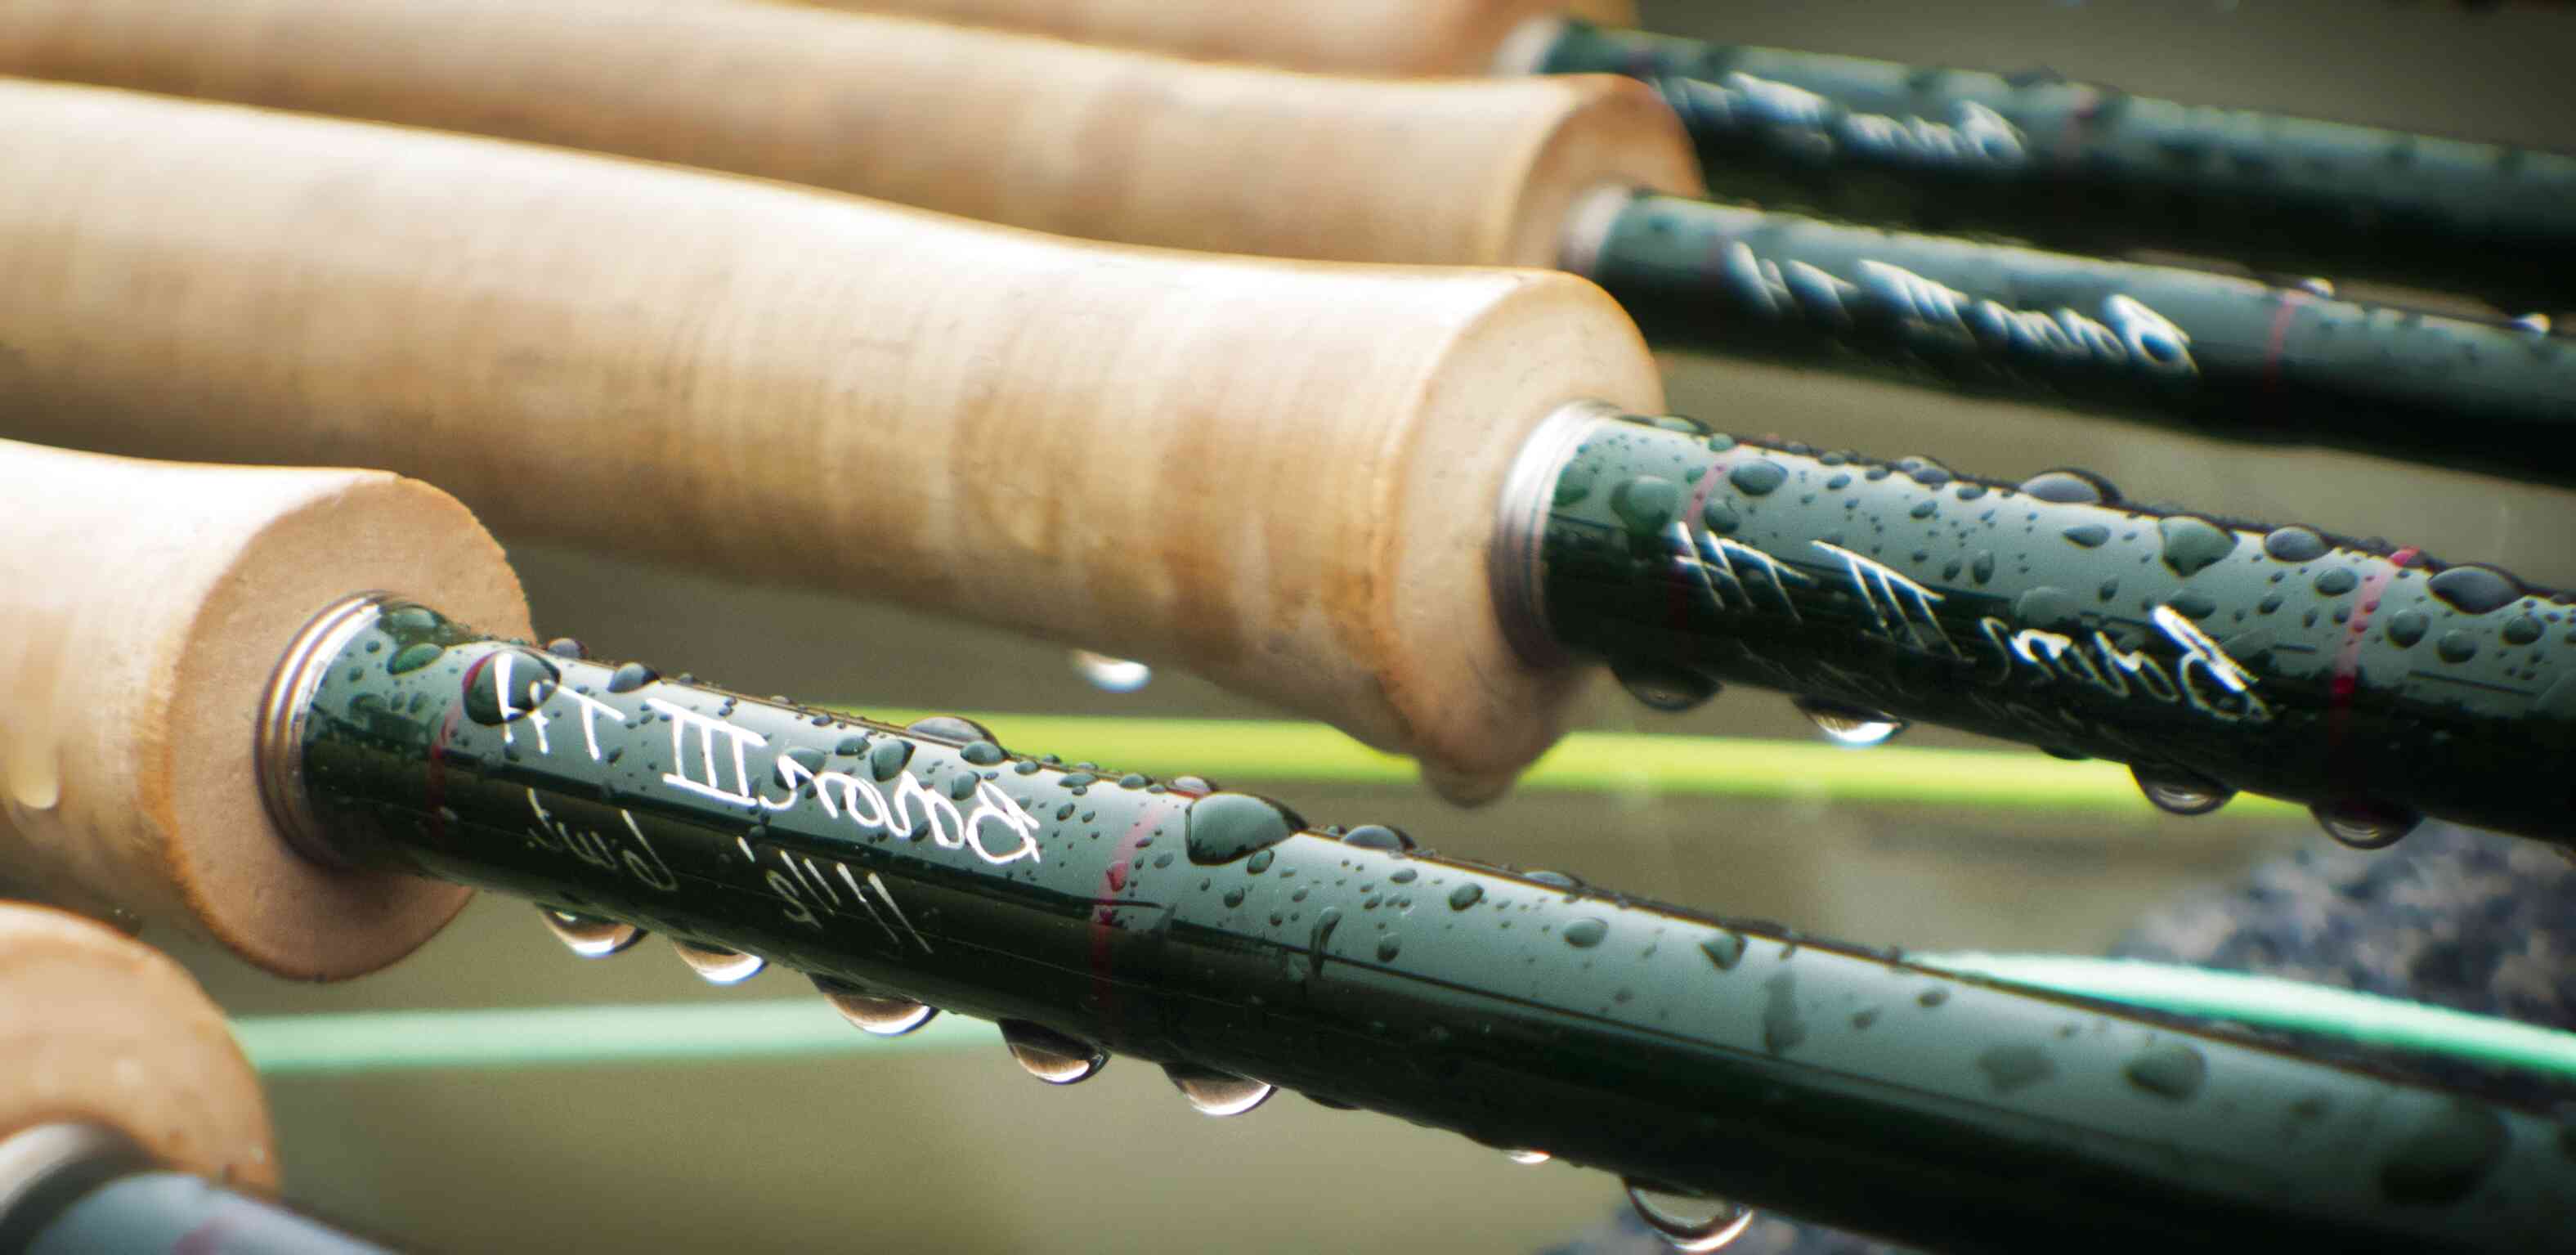 Winston Fly Rod for sale in UK 7 used Winston Fly Rods